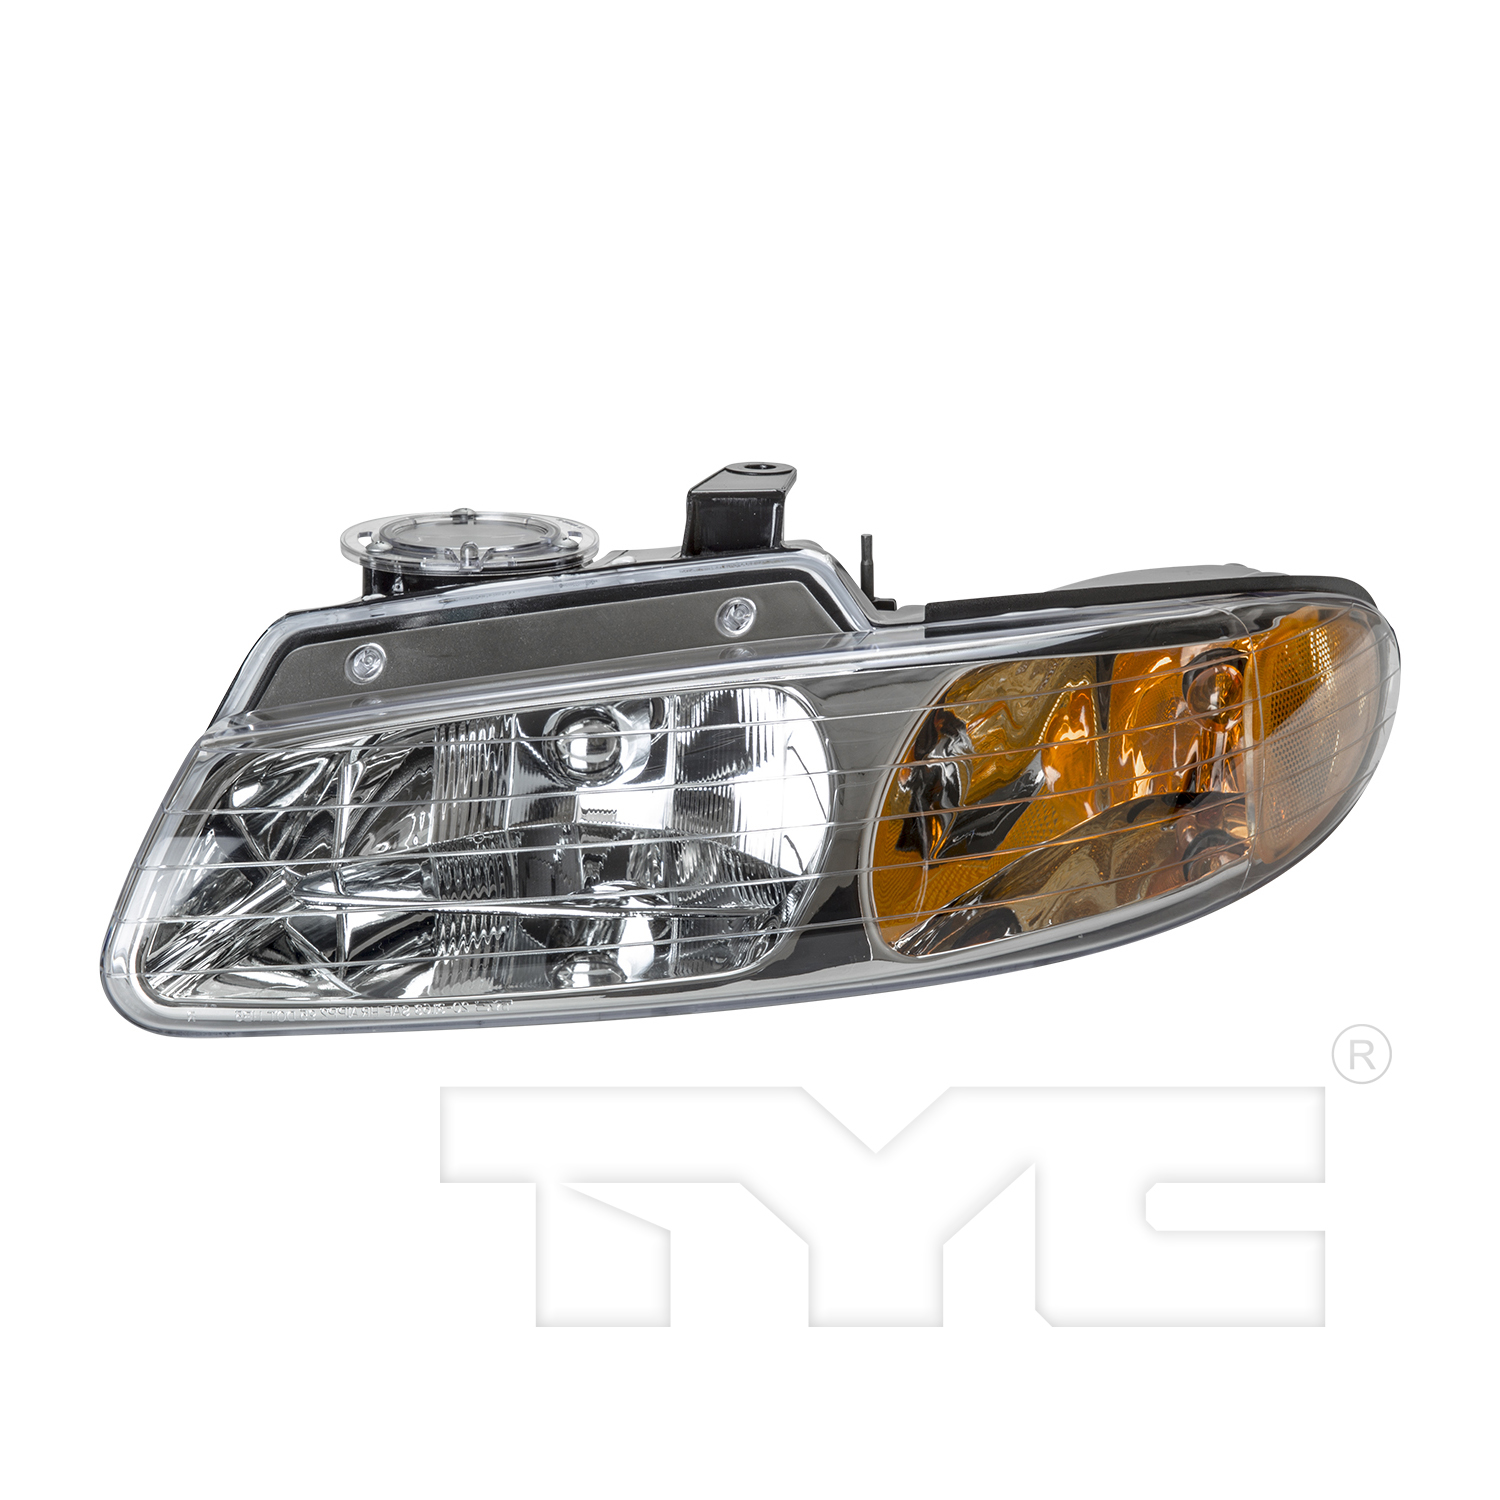 Aftermarket HEADLIGHTS for CHRYSLER - TOWN & COUNTRY, TOWN & COUNTRY,96-99,LT Headlamp assy composite